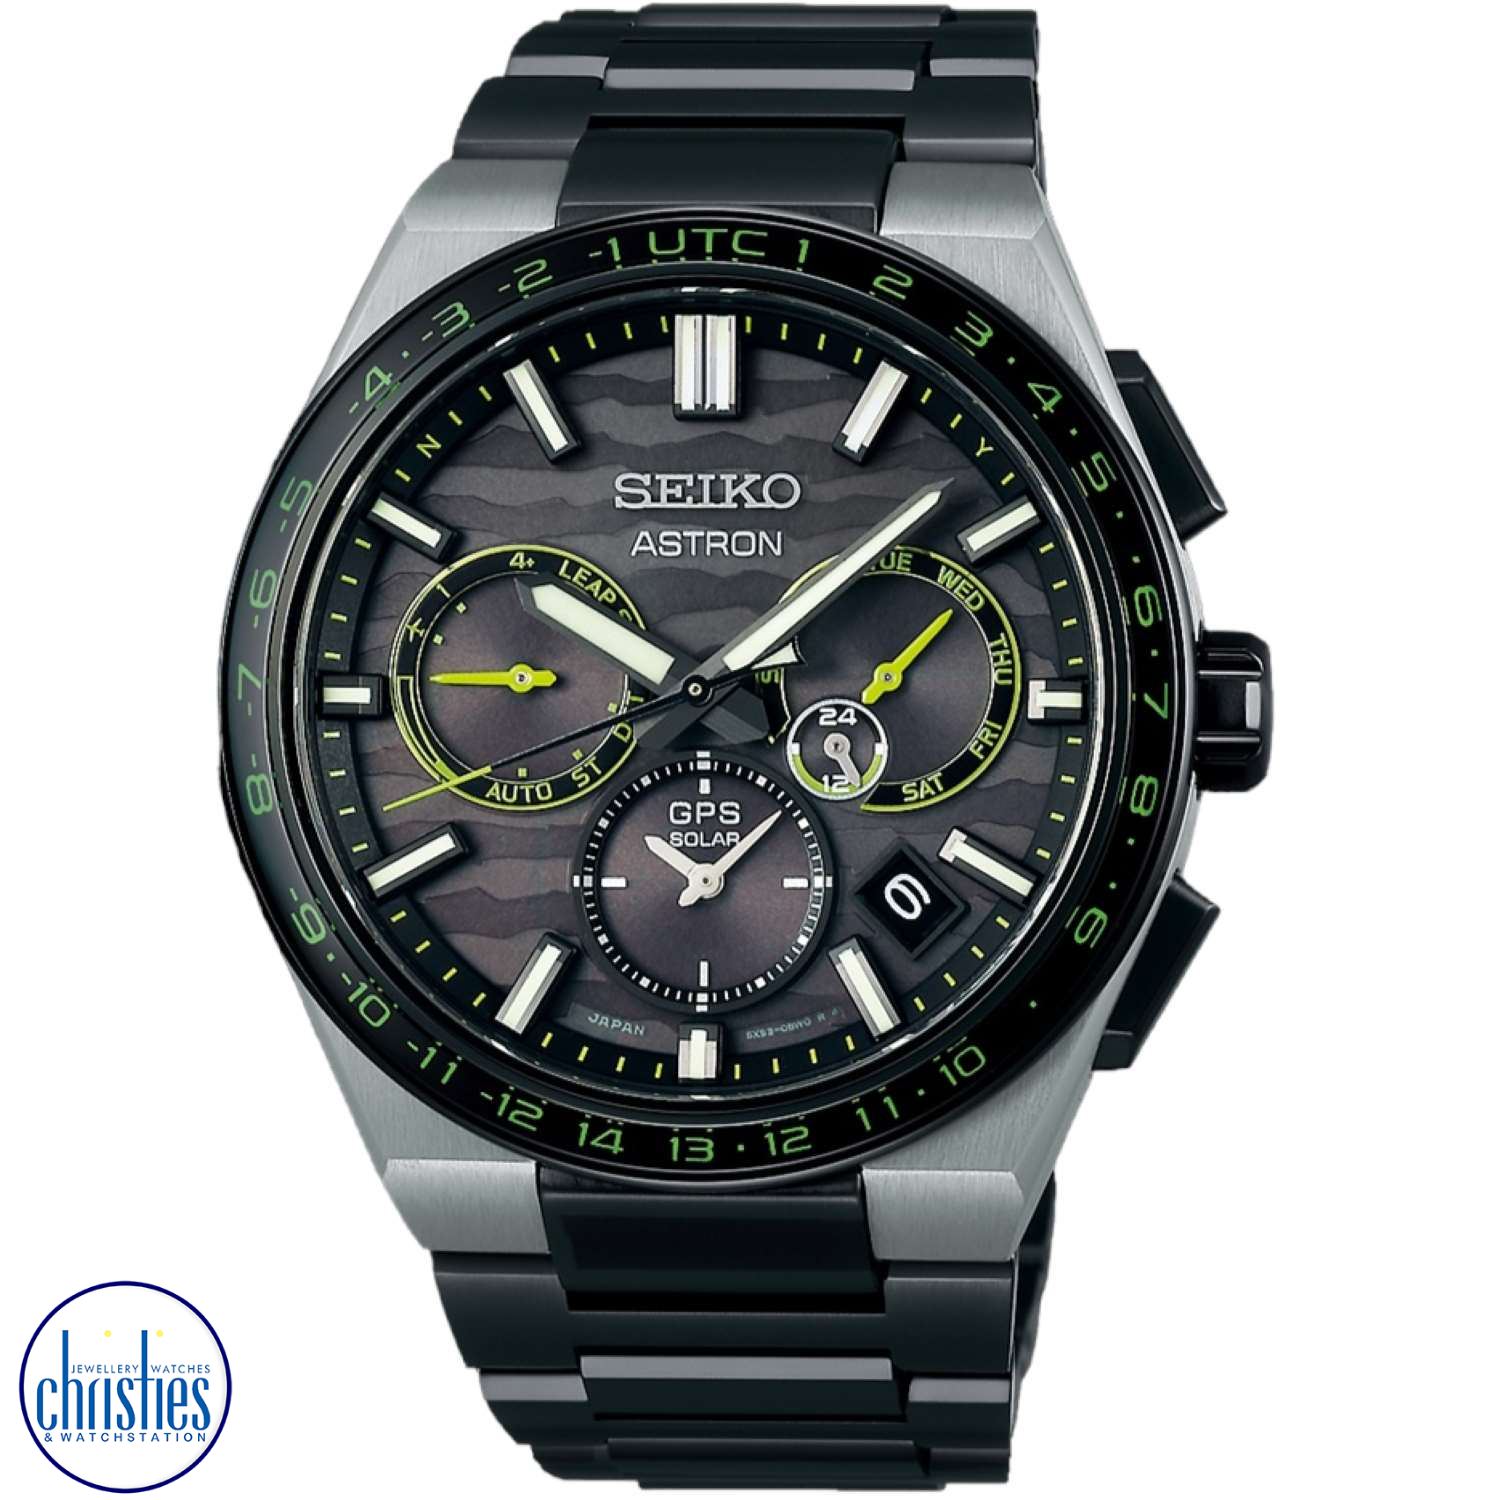 SSH139J Seiko Astron GPS Dual Time Watch Limited Edition1,200 pieces worldwide SSH139J Seiko Watches Auckland